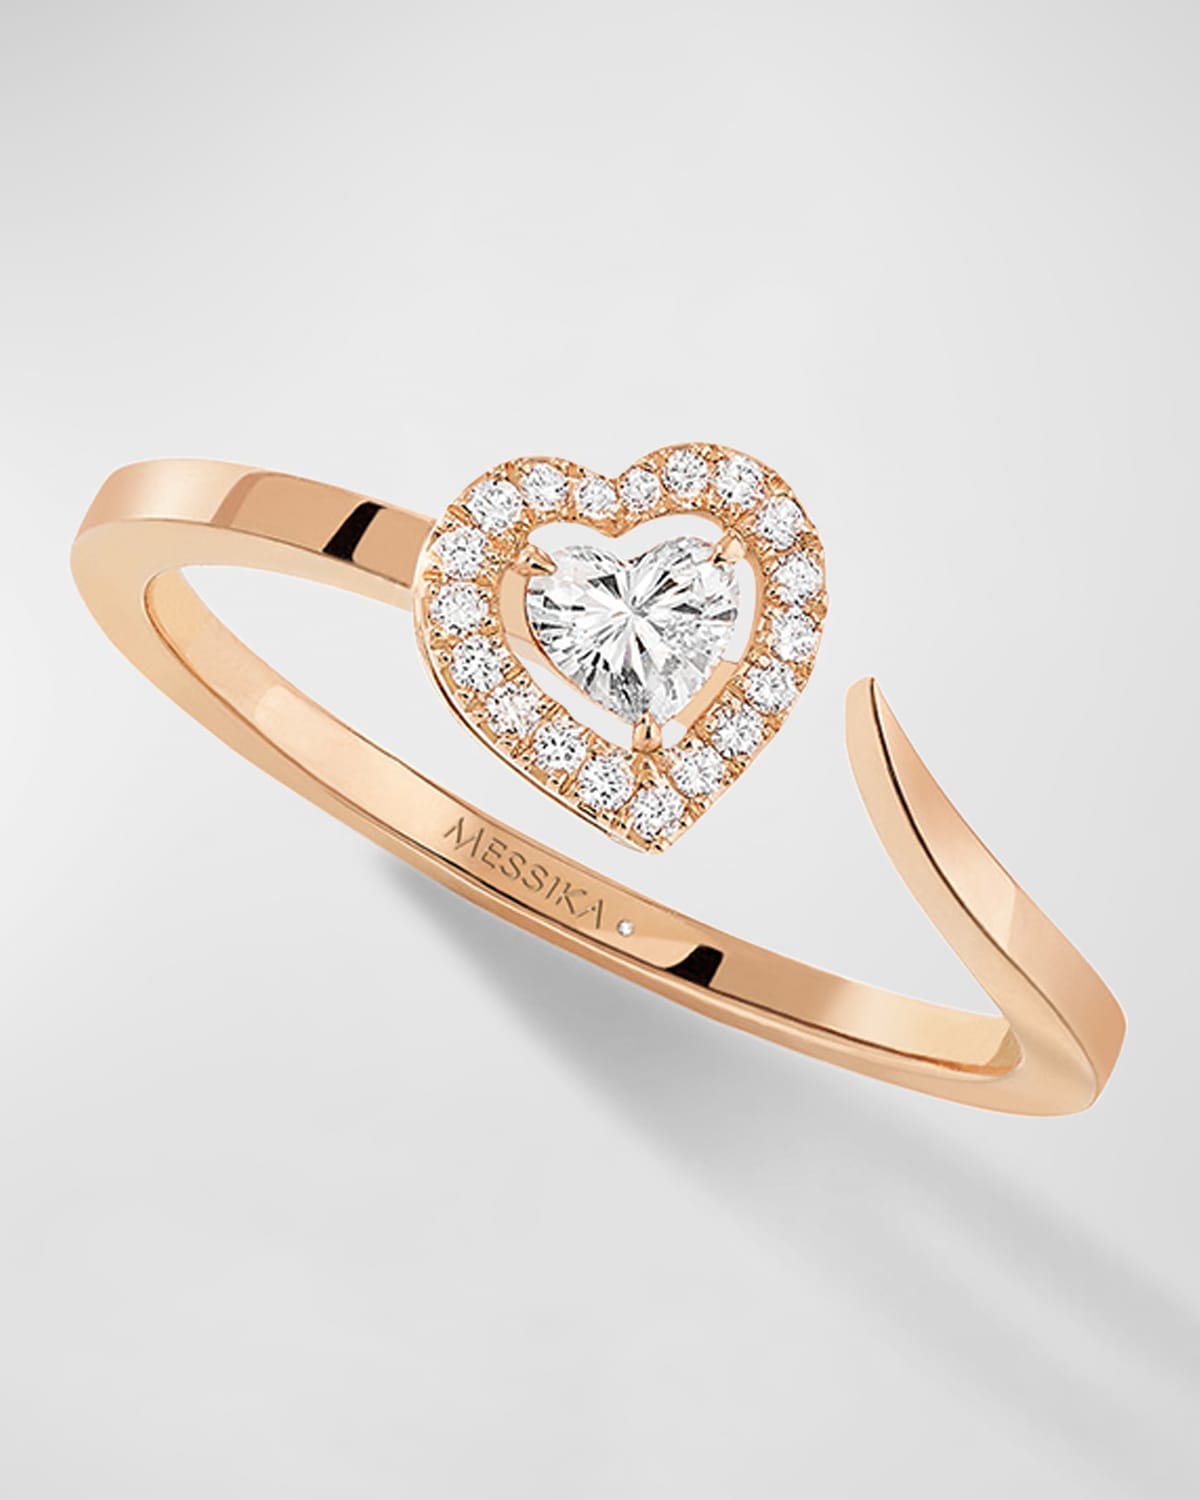 Messika Joy Couer 18k Pink Gold Heart Ring In 15 Rose Gold